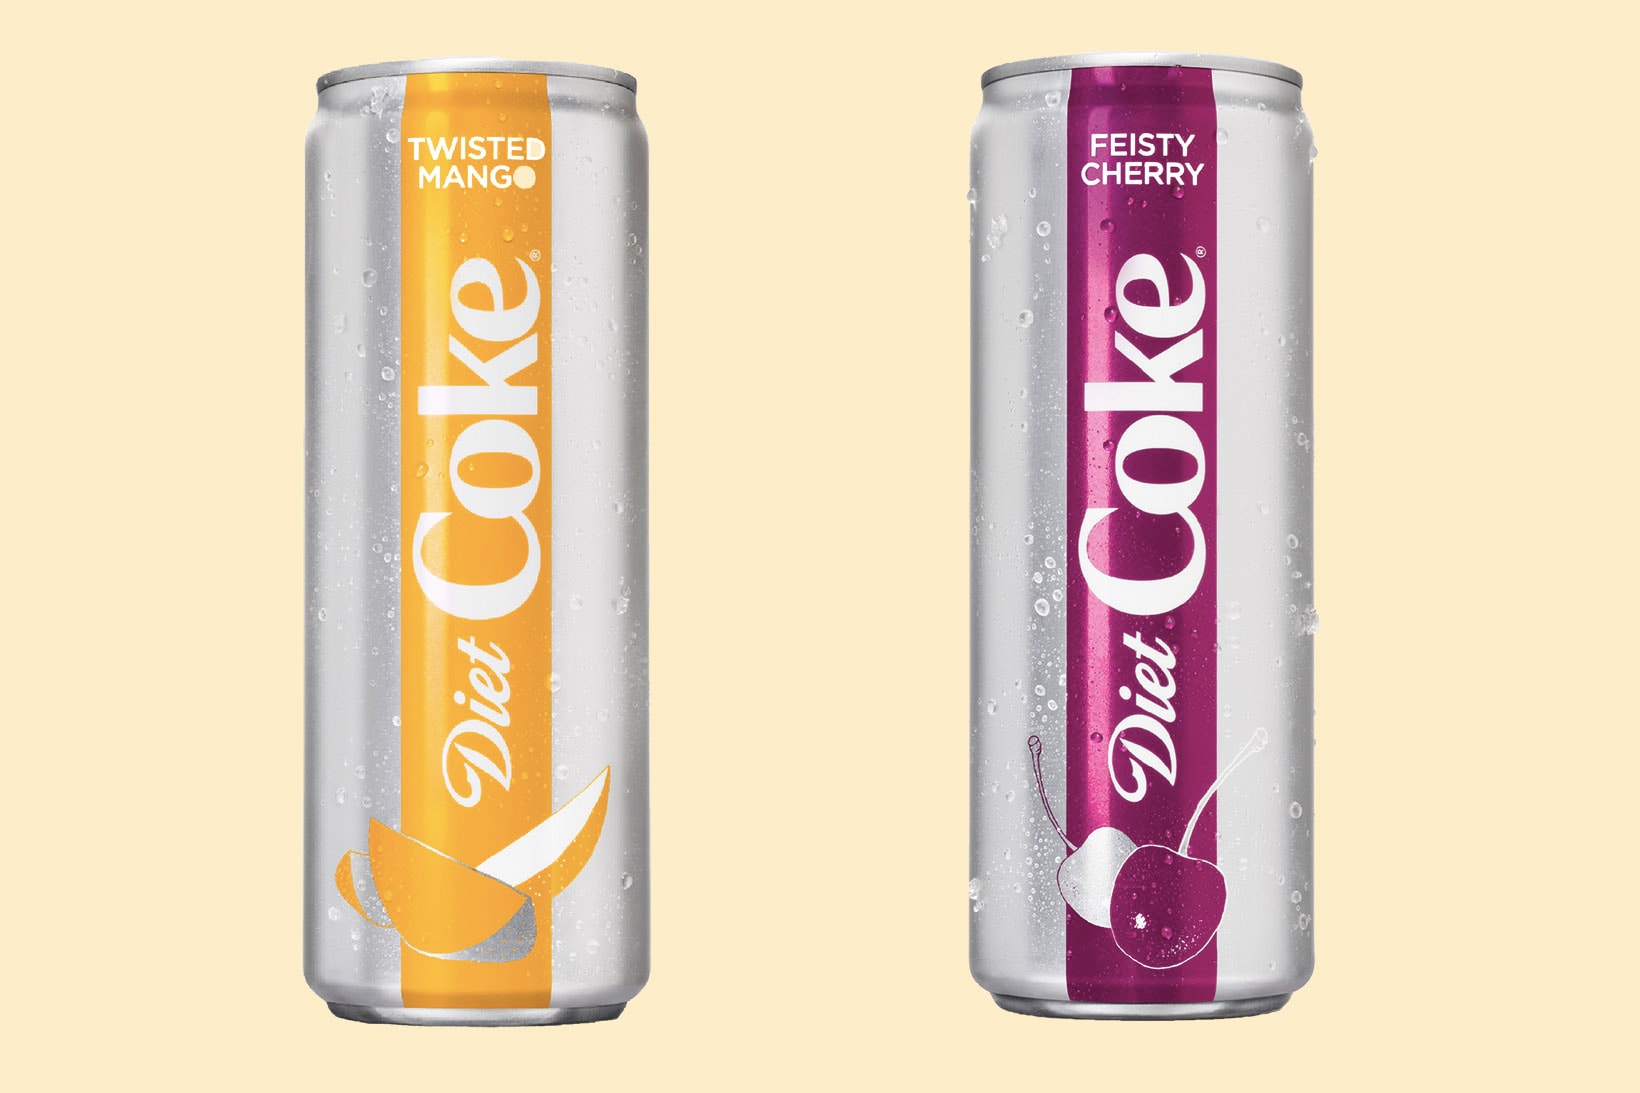 coca-cola diet coke new flavor exotic twisted mango fiesty cherry chili where to buy